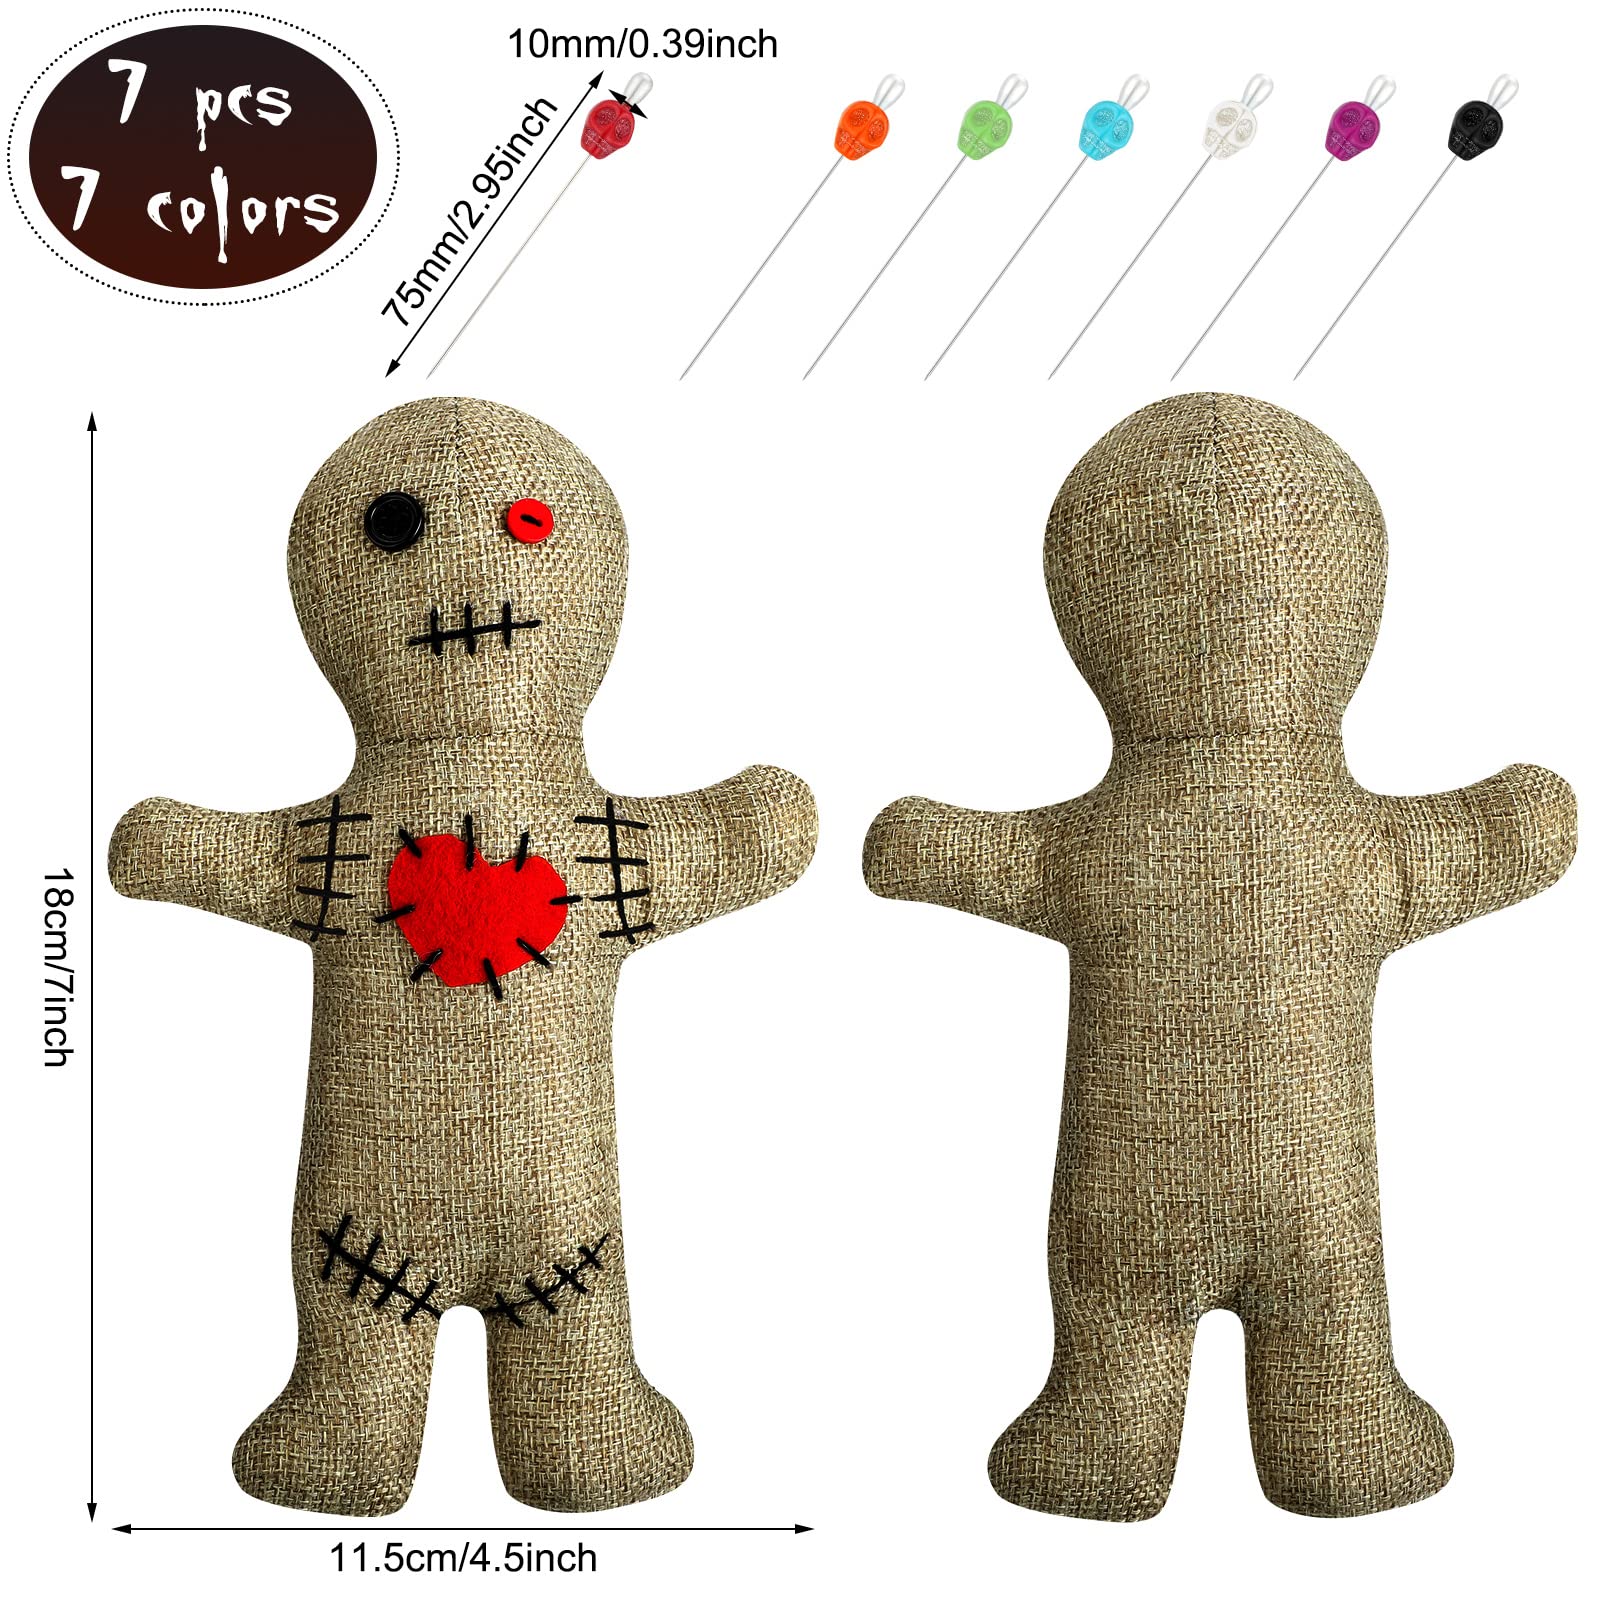 Kathfly 8 Pcs Voodoo Doll Set Include Horror Doll, 7 Pcs Skull Pins Ghost Doll Soft Revenge Dammit Creepy Dolls Pin Holder Voodoo Toys Resin Metal Straight Pins Stress Relieving (Flaxen, Linen)